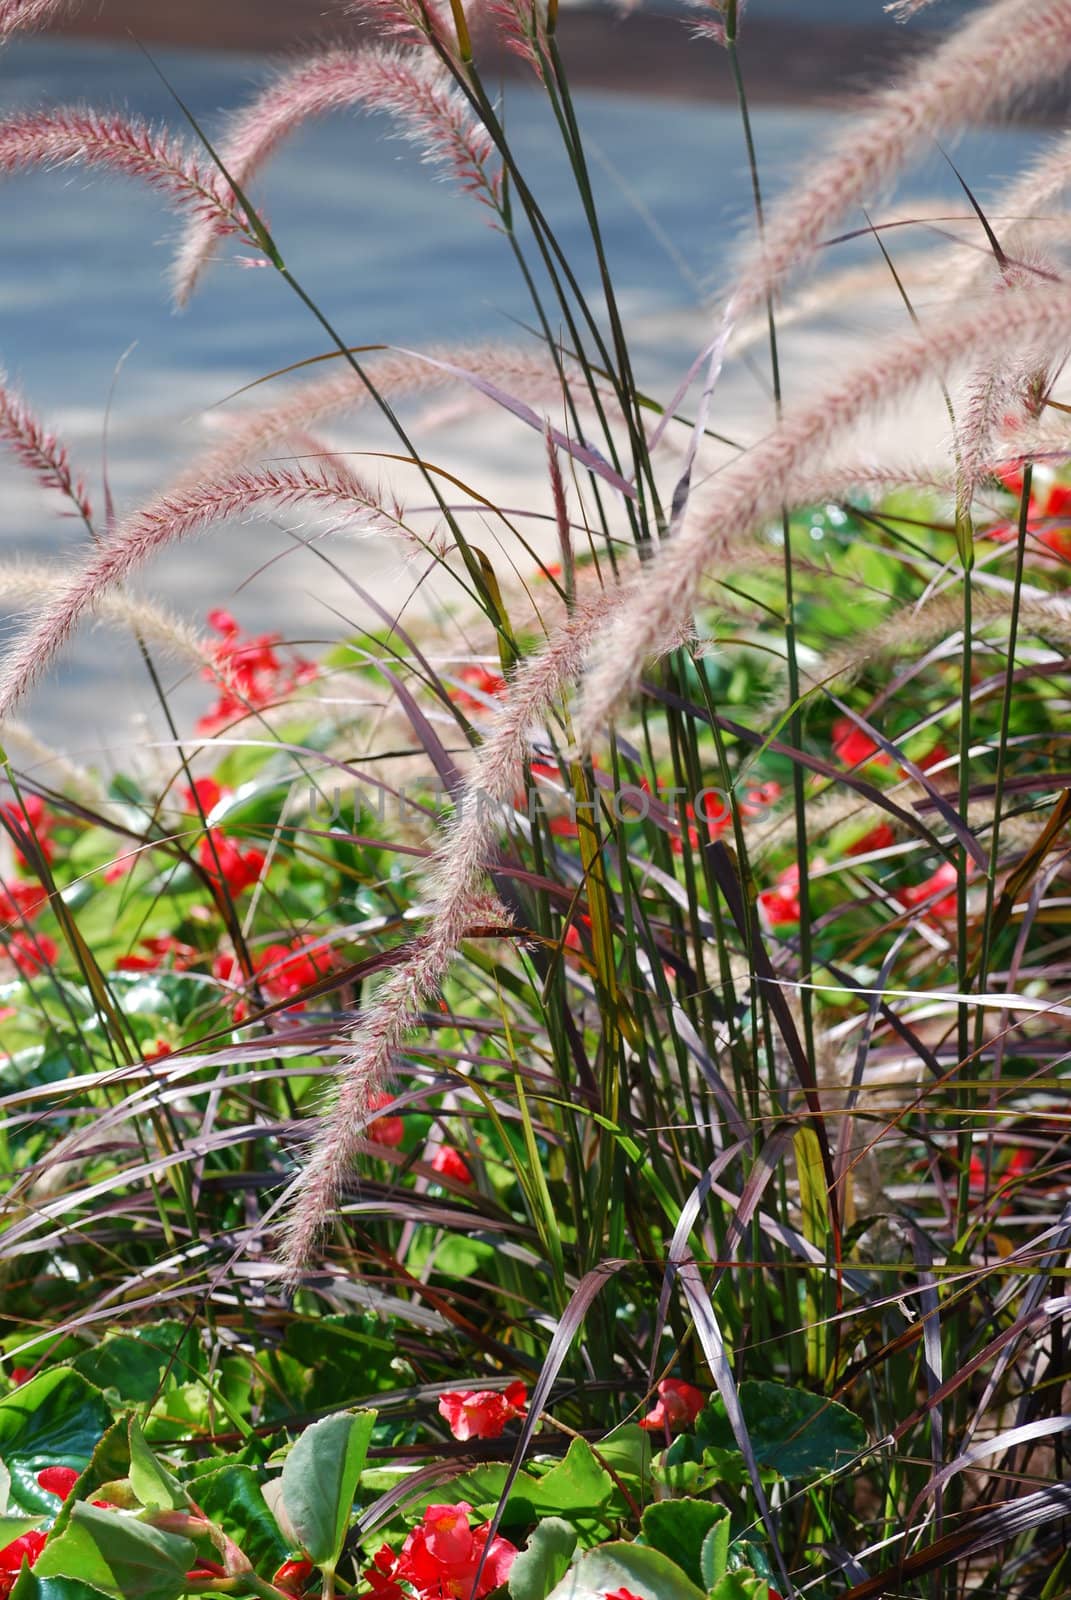 Grass, spikes  and flowers on flowerbed